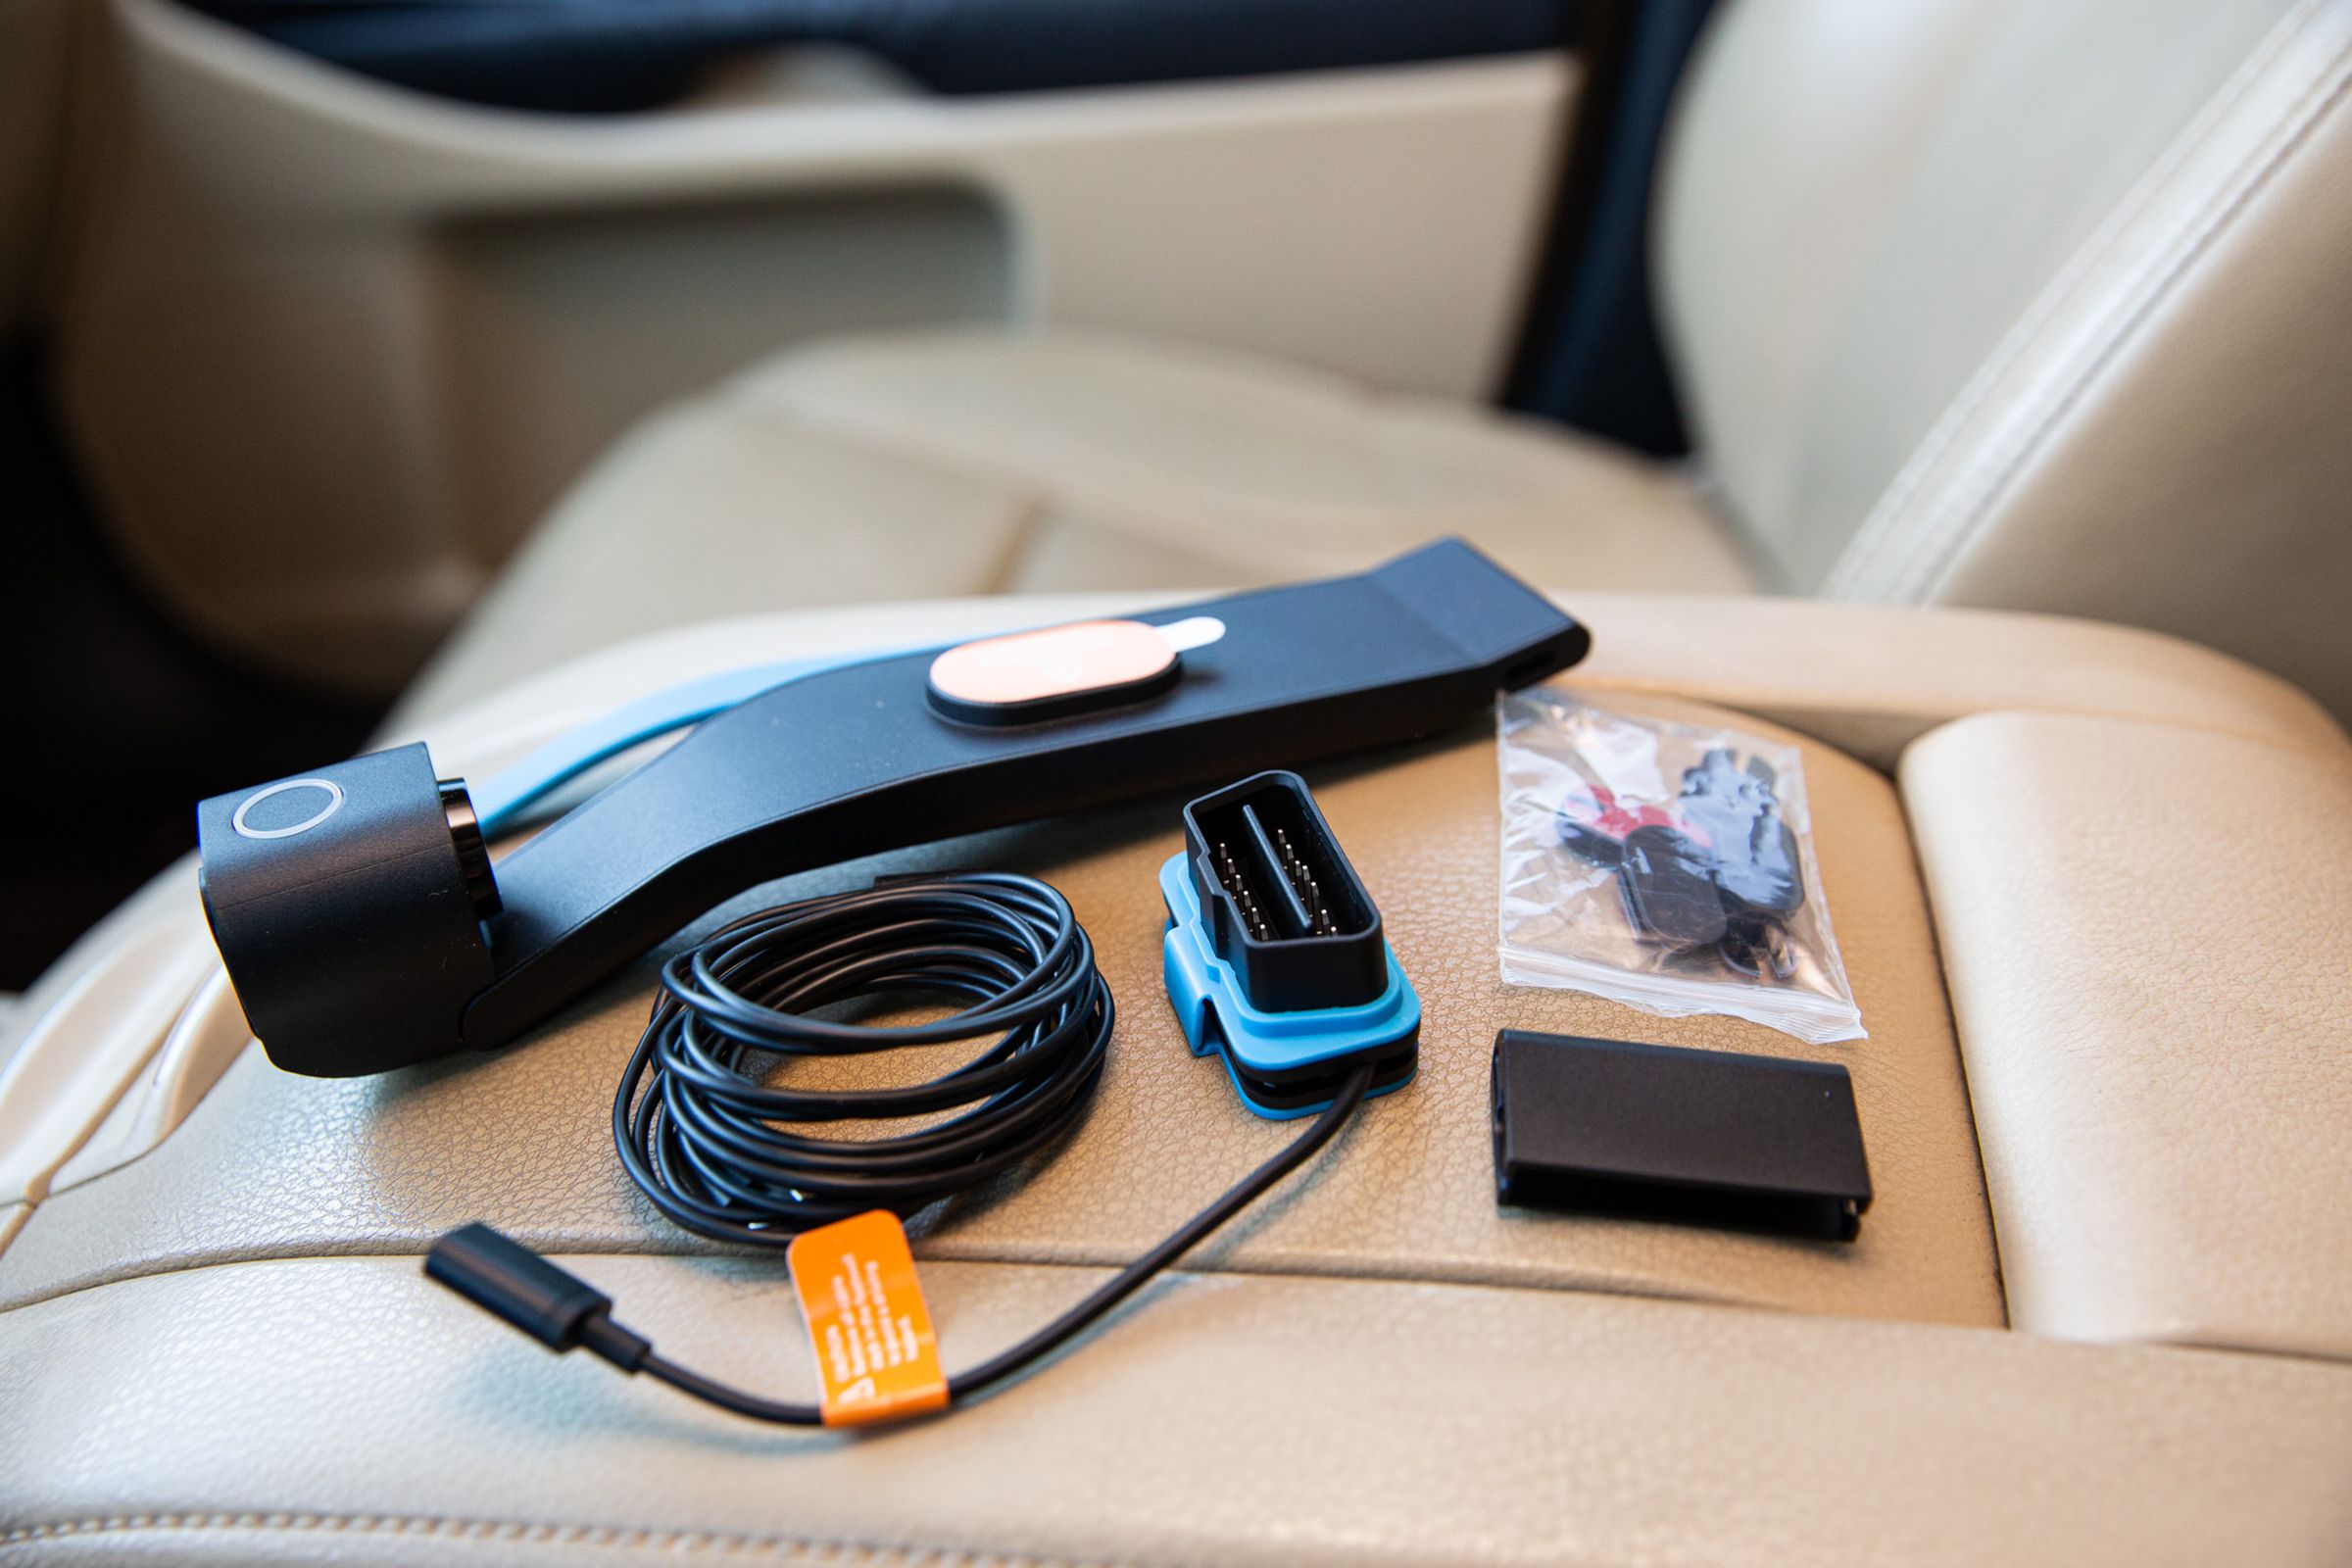 The Car Cam has all the tools you need to install the device, including tape to secure the wiring.